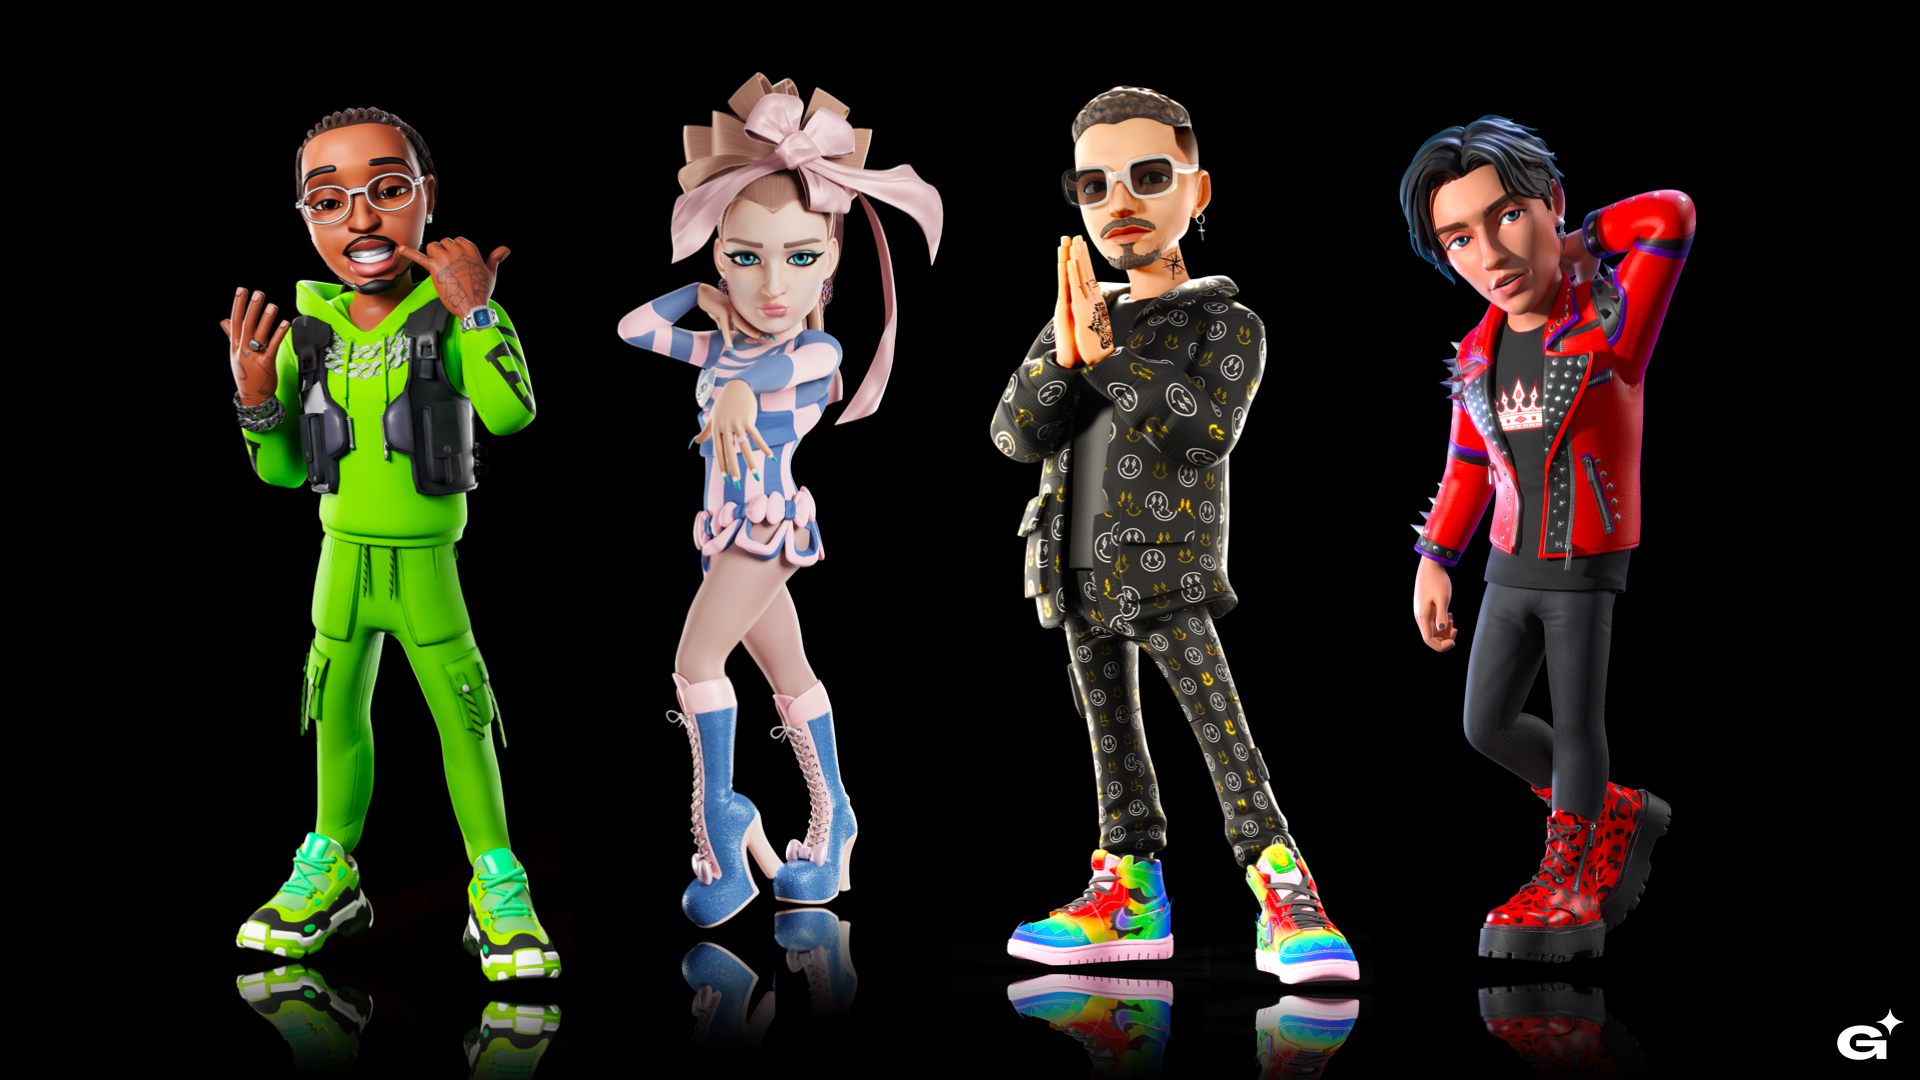 UNIVERSAL MUSIC GROUP AND GENIES ANNOUNCE GLOBAL PARTNERSHIP TO DEVELOP  AVATARS AND DIGITAL WEARABLE NFTS FOR THE COMPANY'S ICONIC ROSTER OF  ARTISTS - UMG